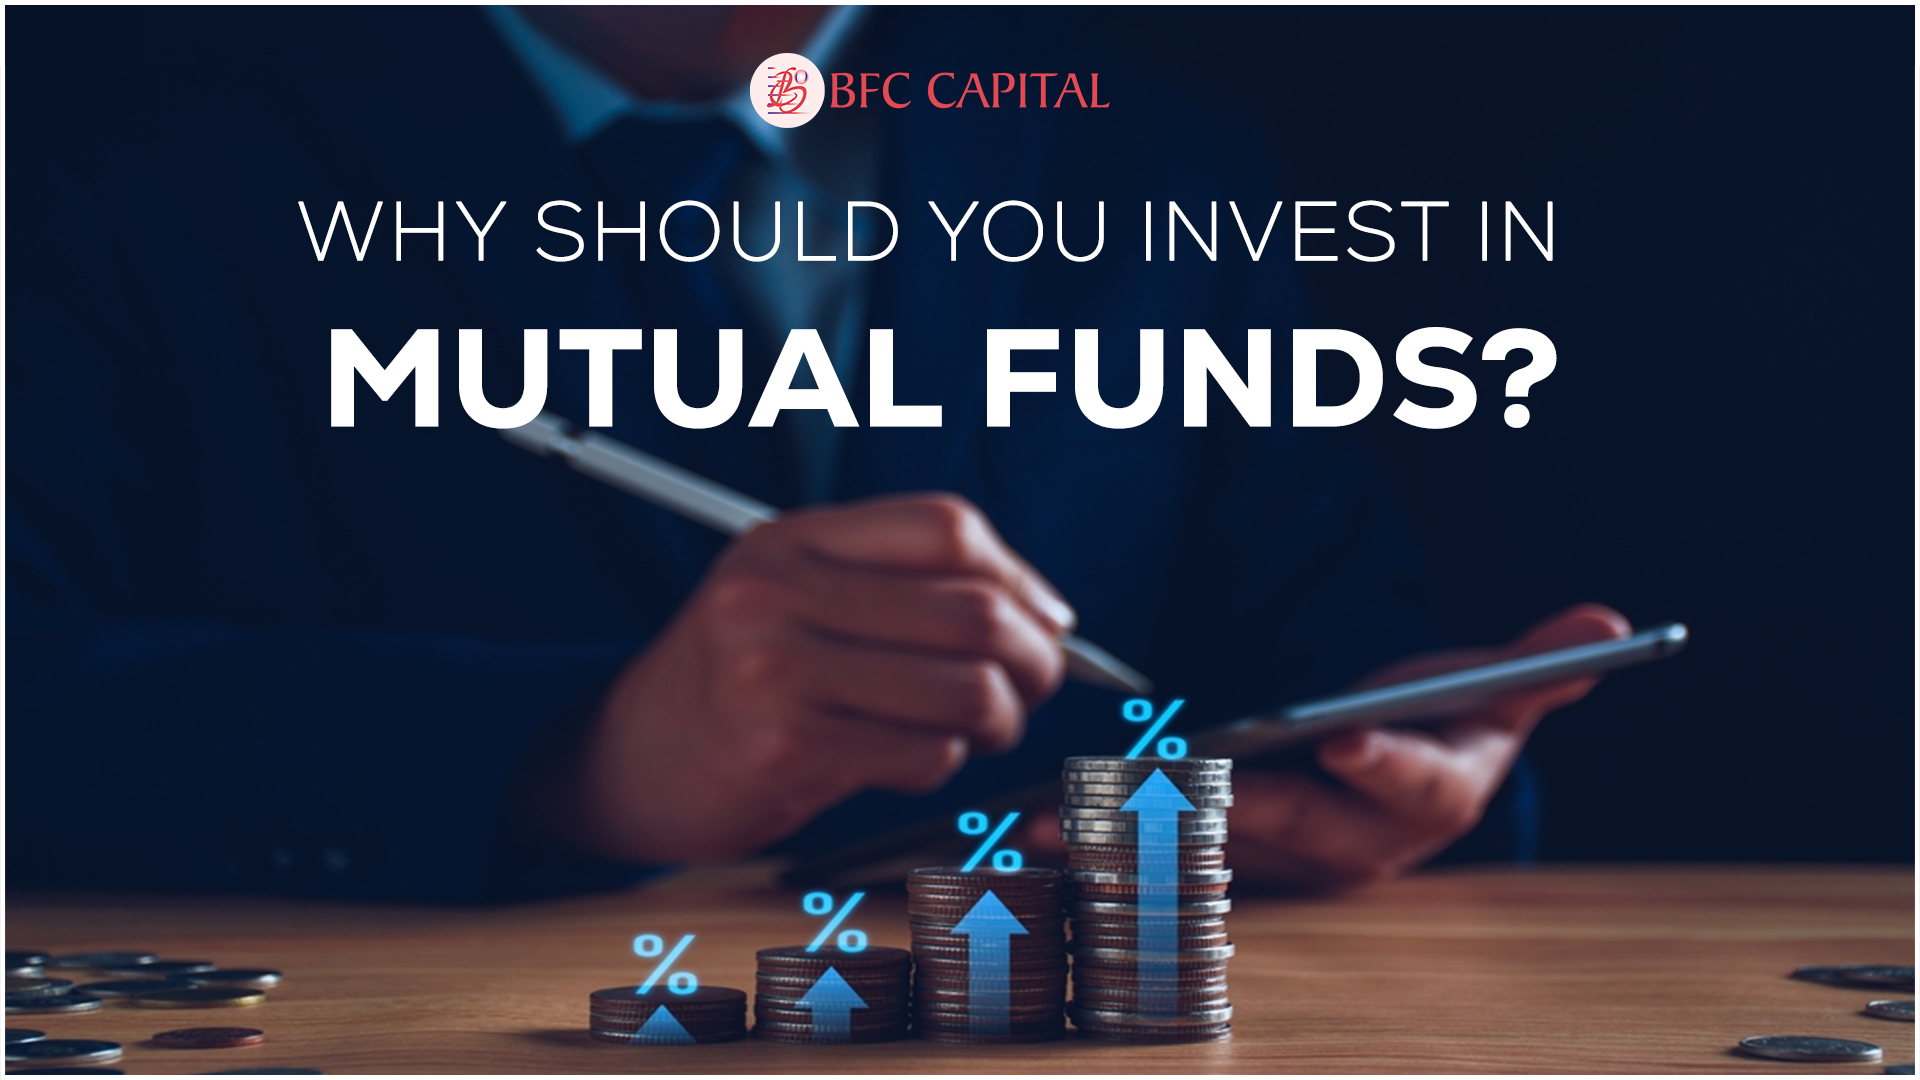 Why Should You Invest in Mutual Funds?